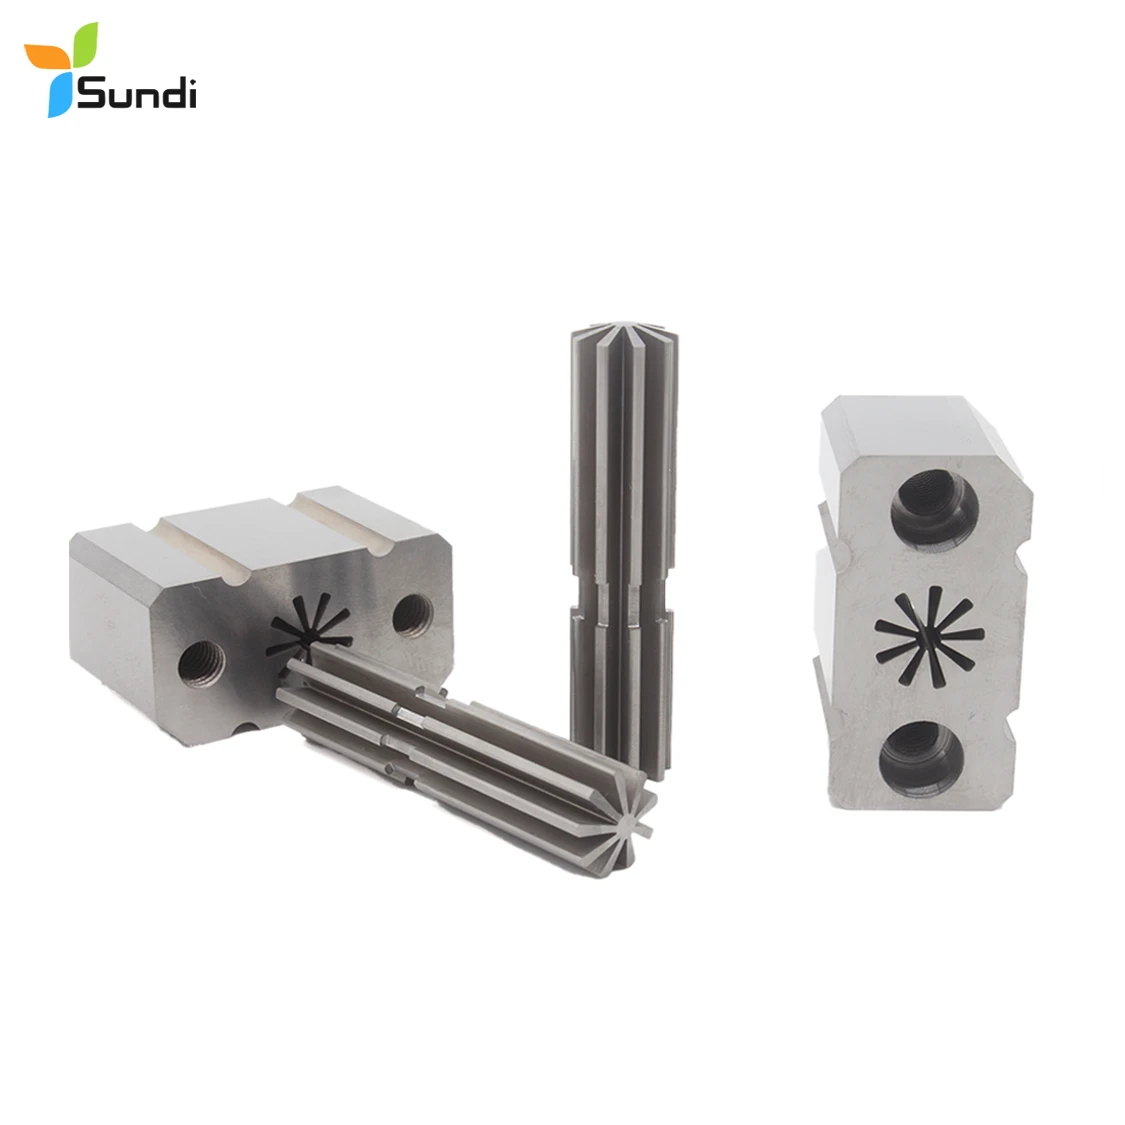 tungsten carbide high precision molding die accessories stamping tools progressive stamping die